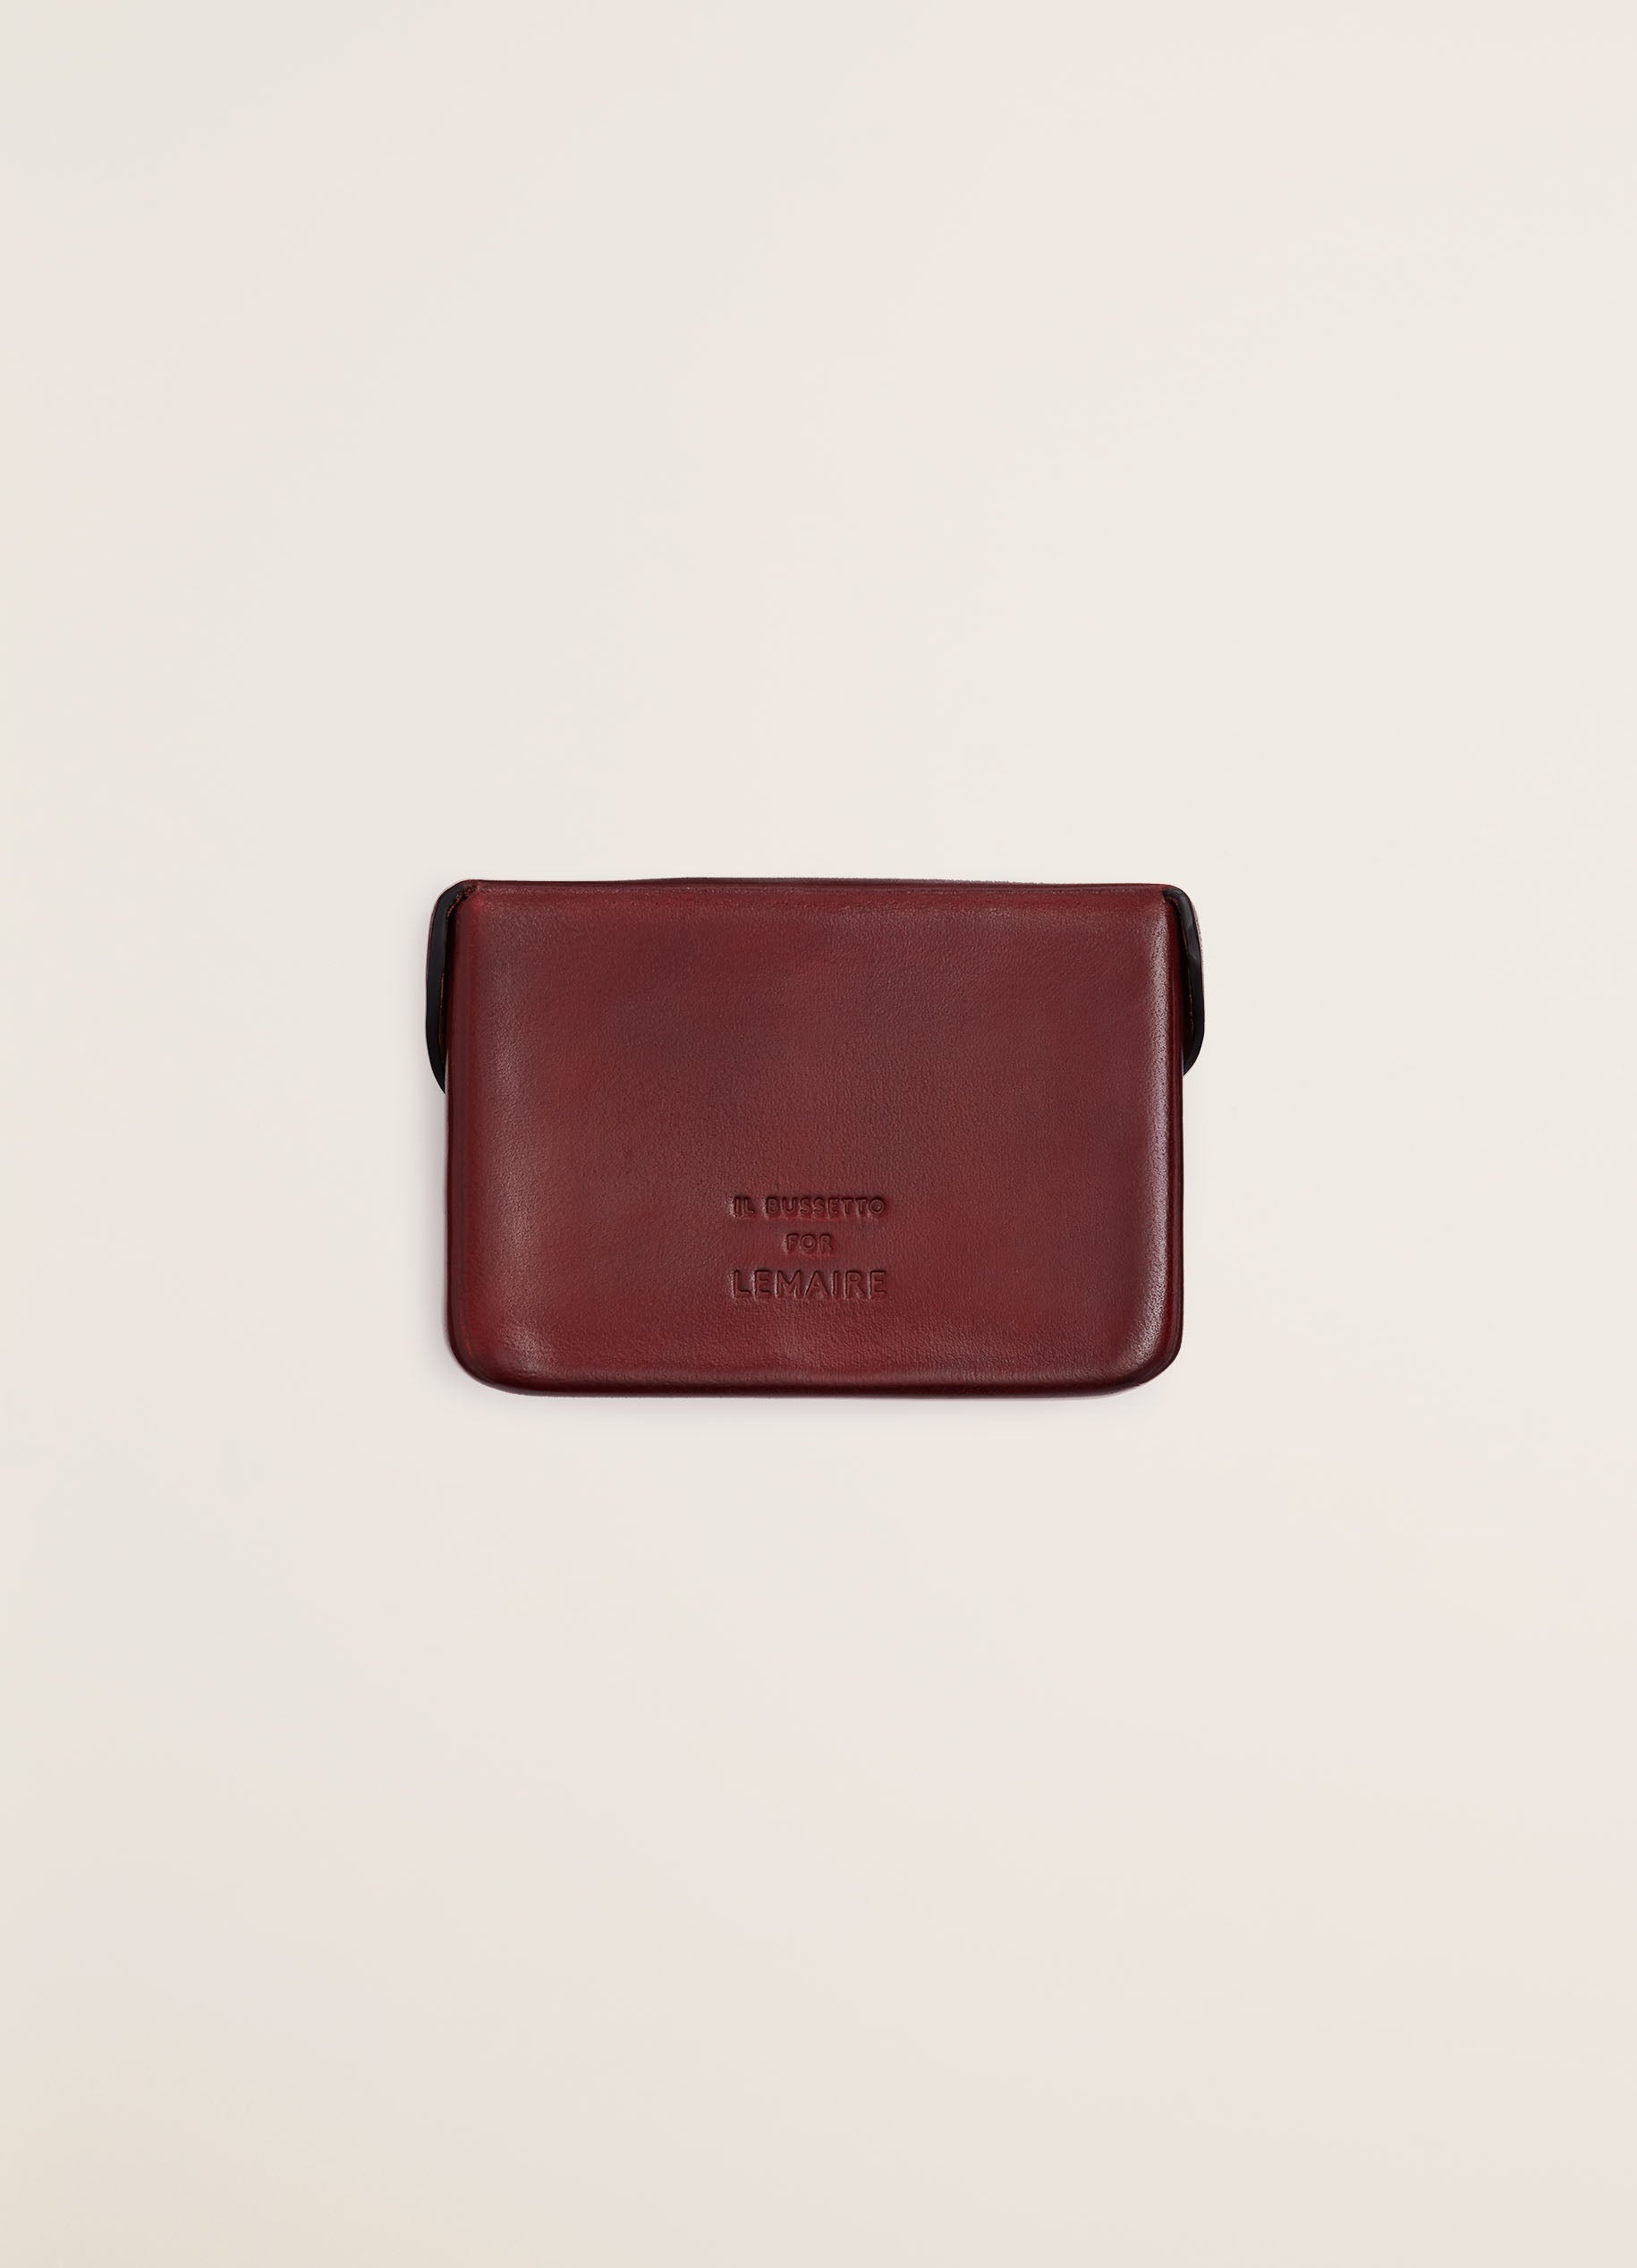 IL BUSSETTO FOR LEMAIRE CARD HOLDER - 2